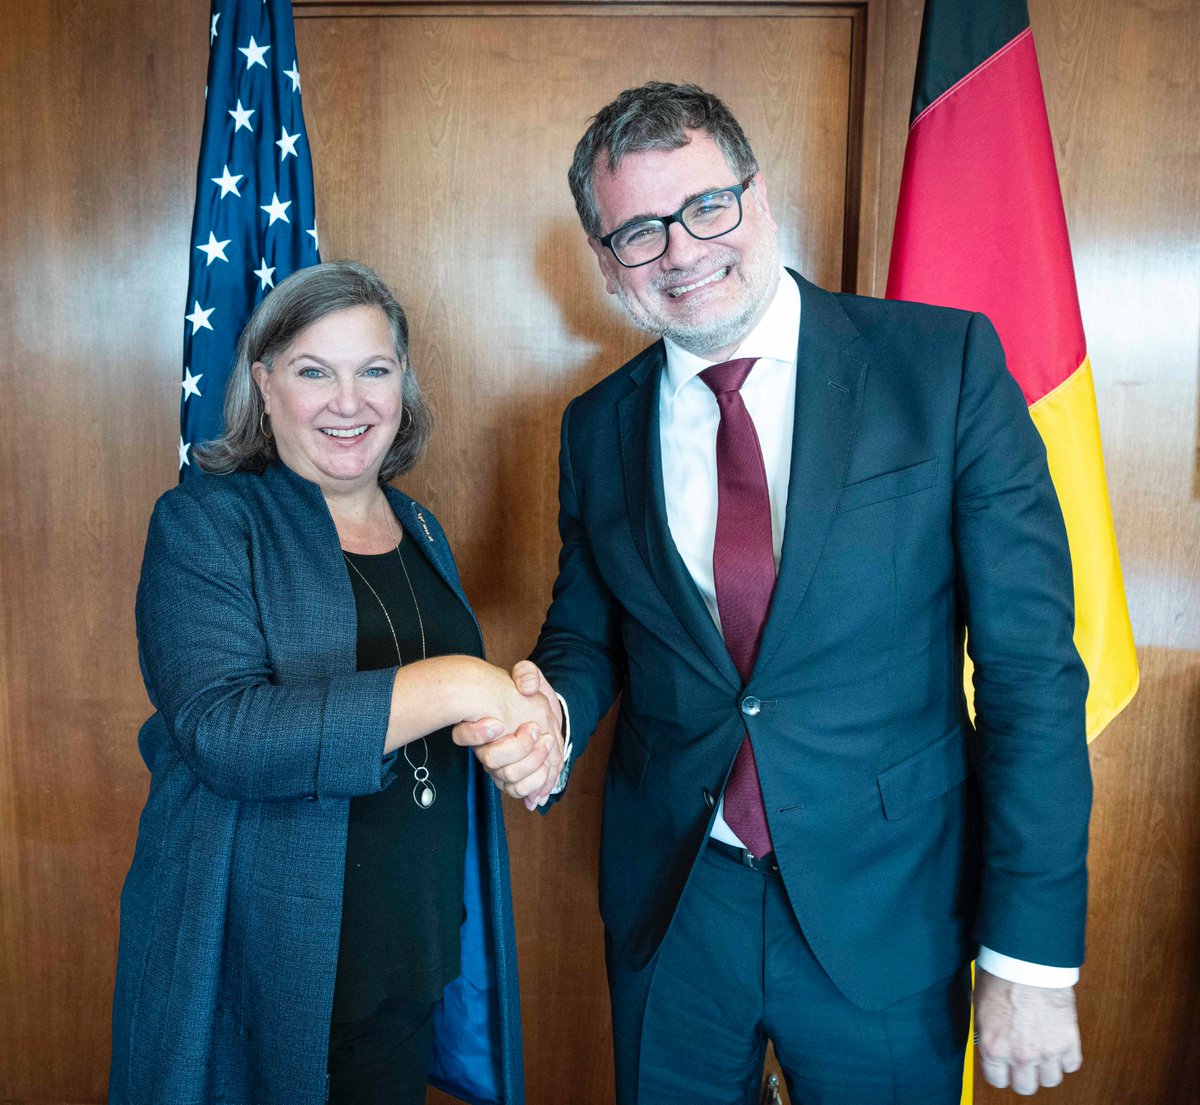 Great meeting with Head of the German Chancellery Wolfgang Schmidt. U.S. and Germany stand together on all the most pressing global issues.